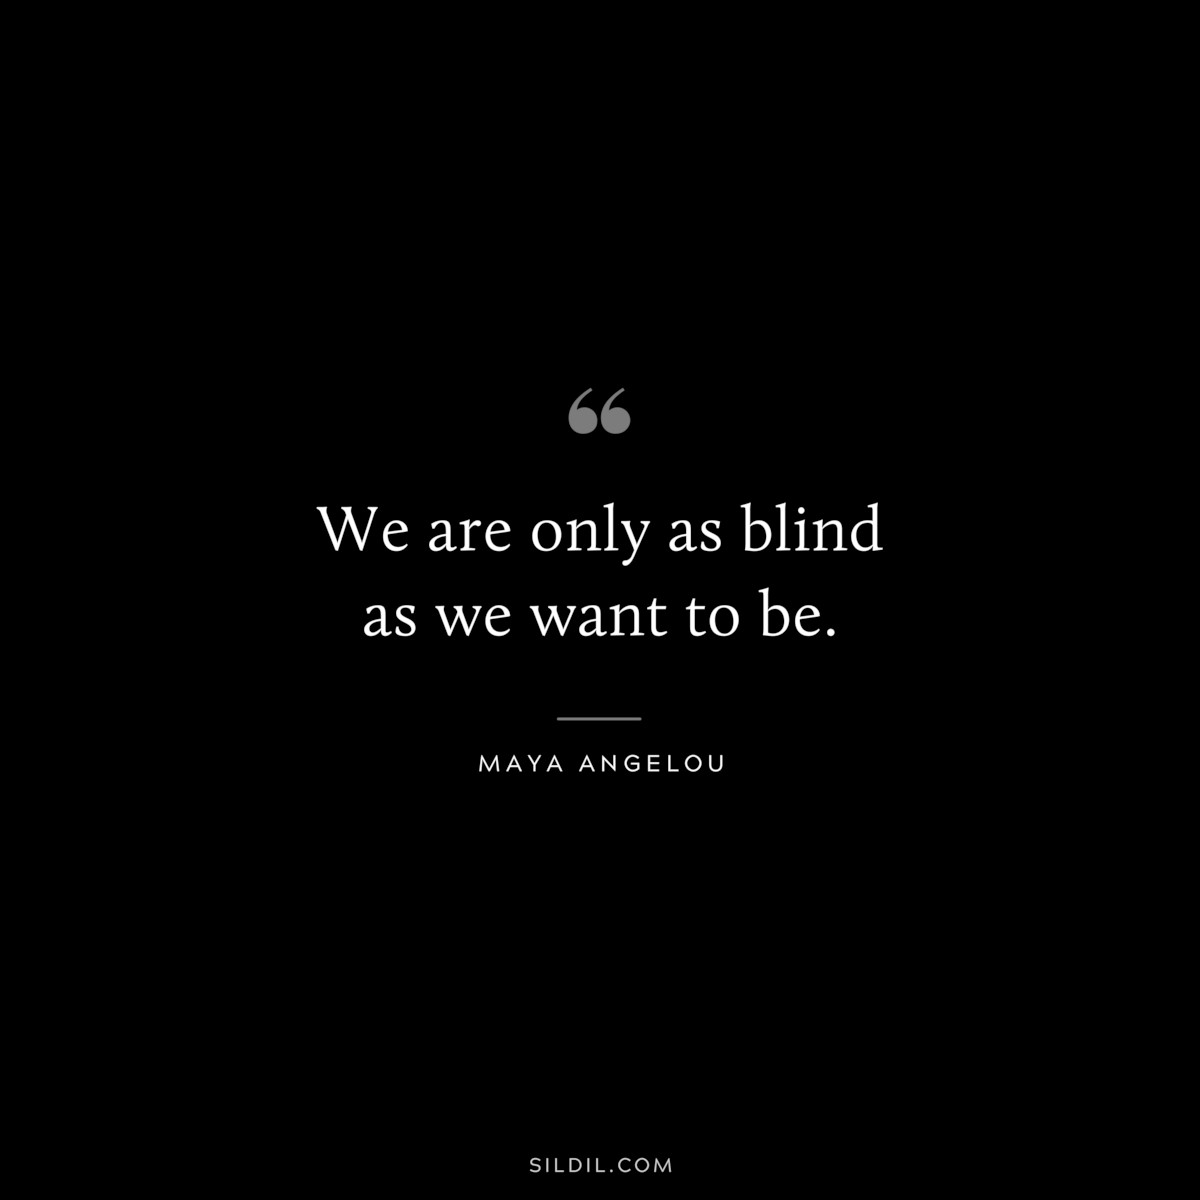 We are only as blind as we want to be. ― Maya Angelou